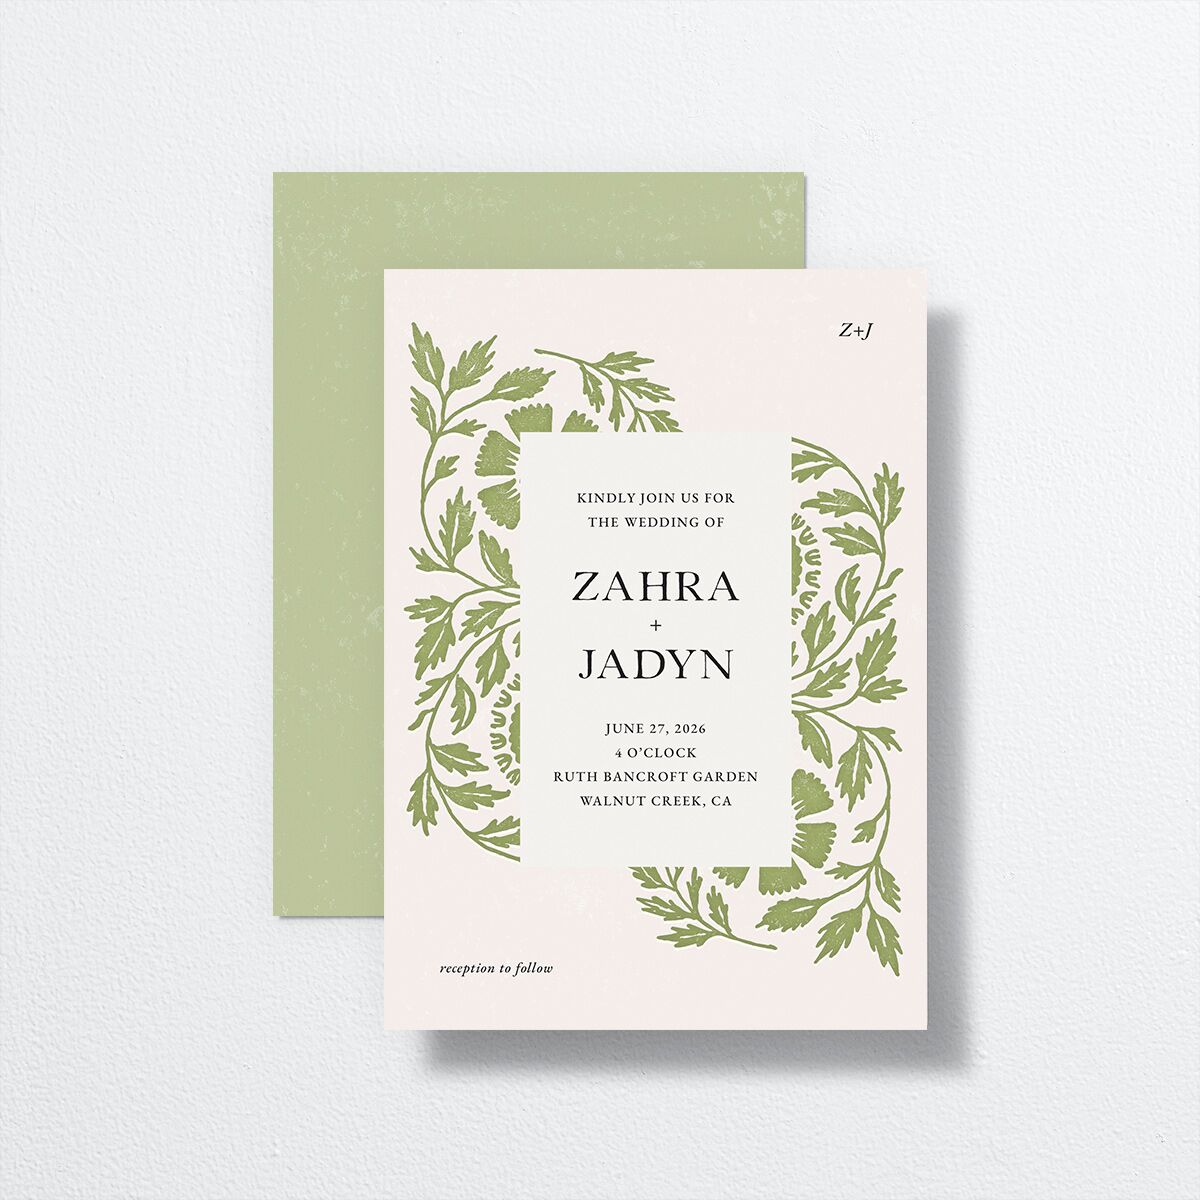 Block Print Wedding Invitations front-and-back in green